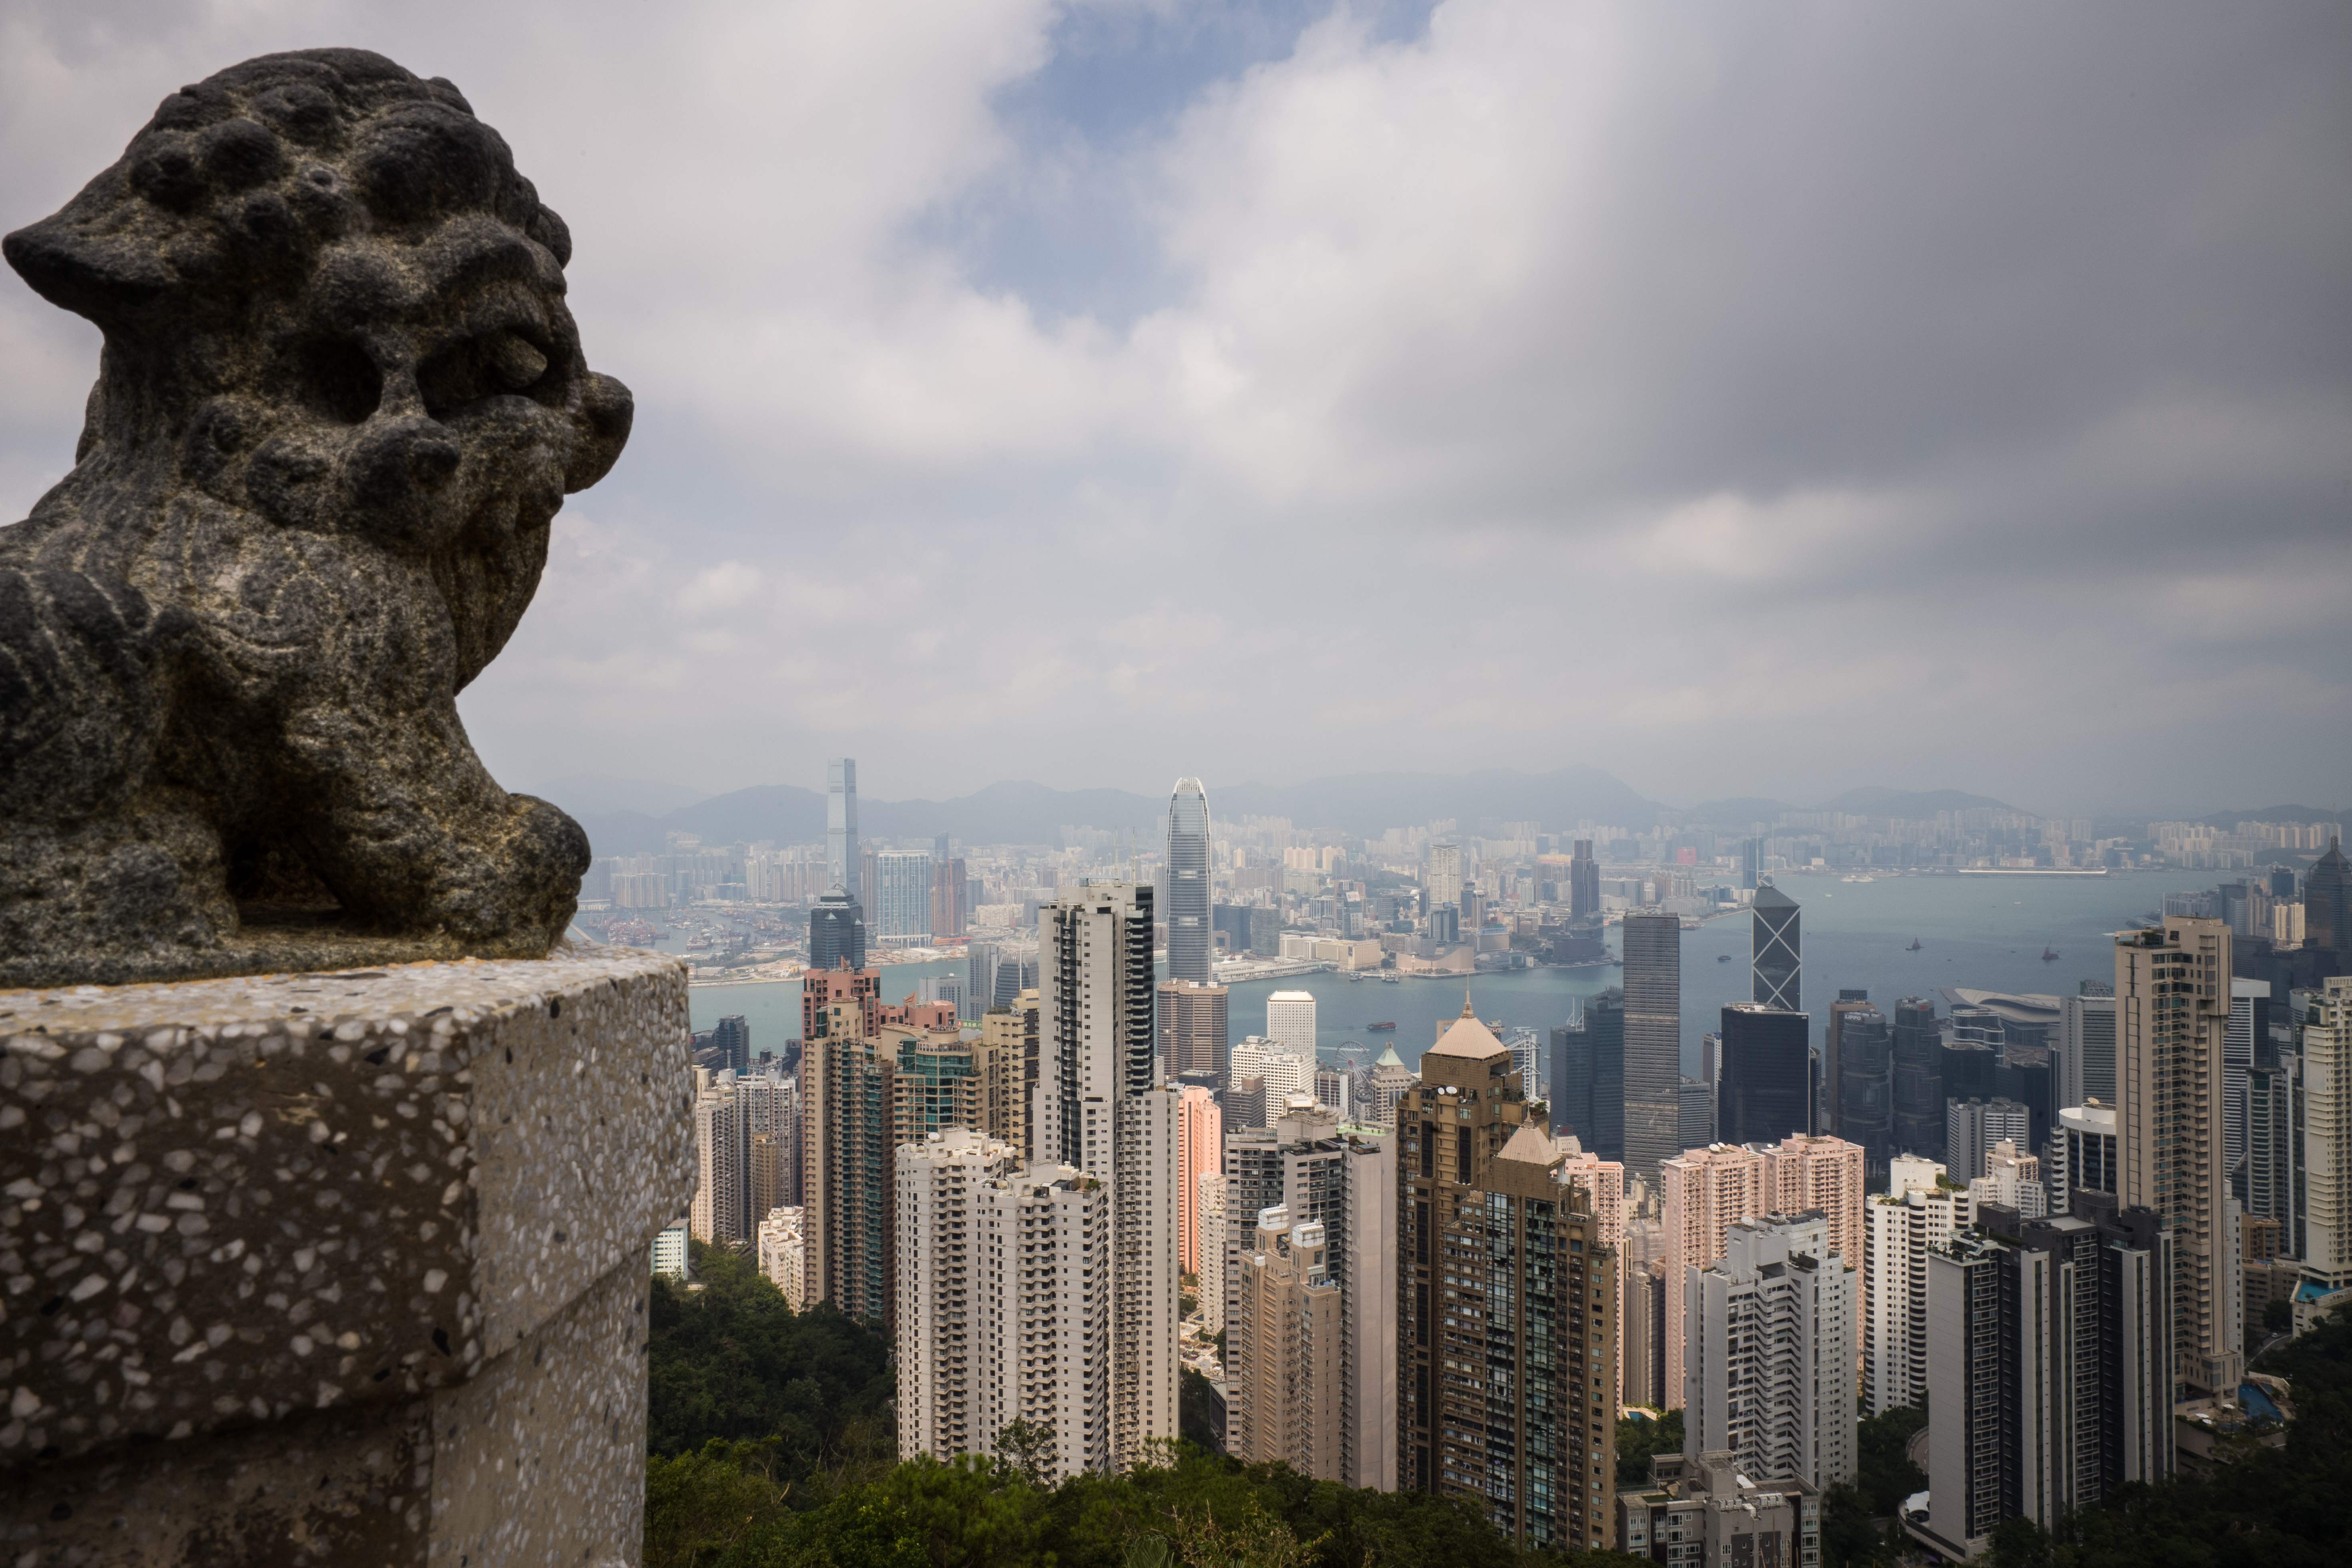 Hong Kong’s property market is showing signs of slowing down as a slew of factors have caused prices to fall recently. Photo: AFP